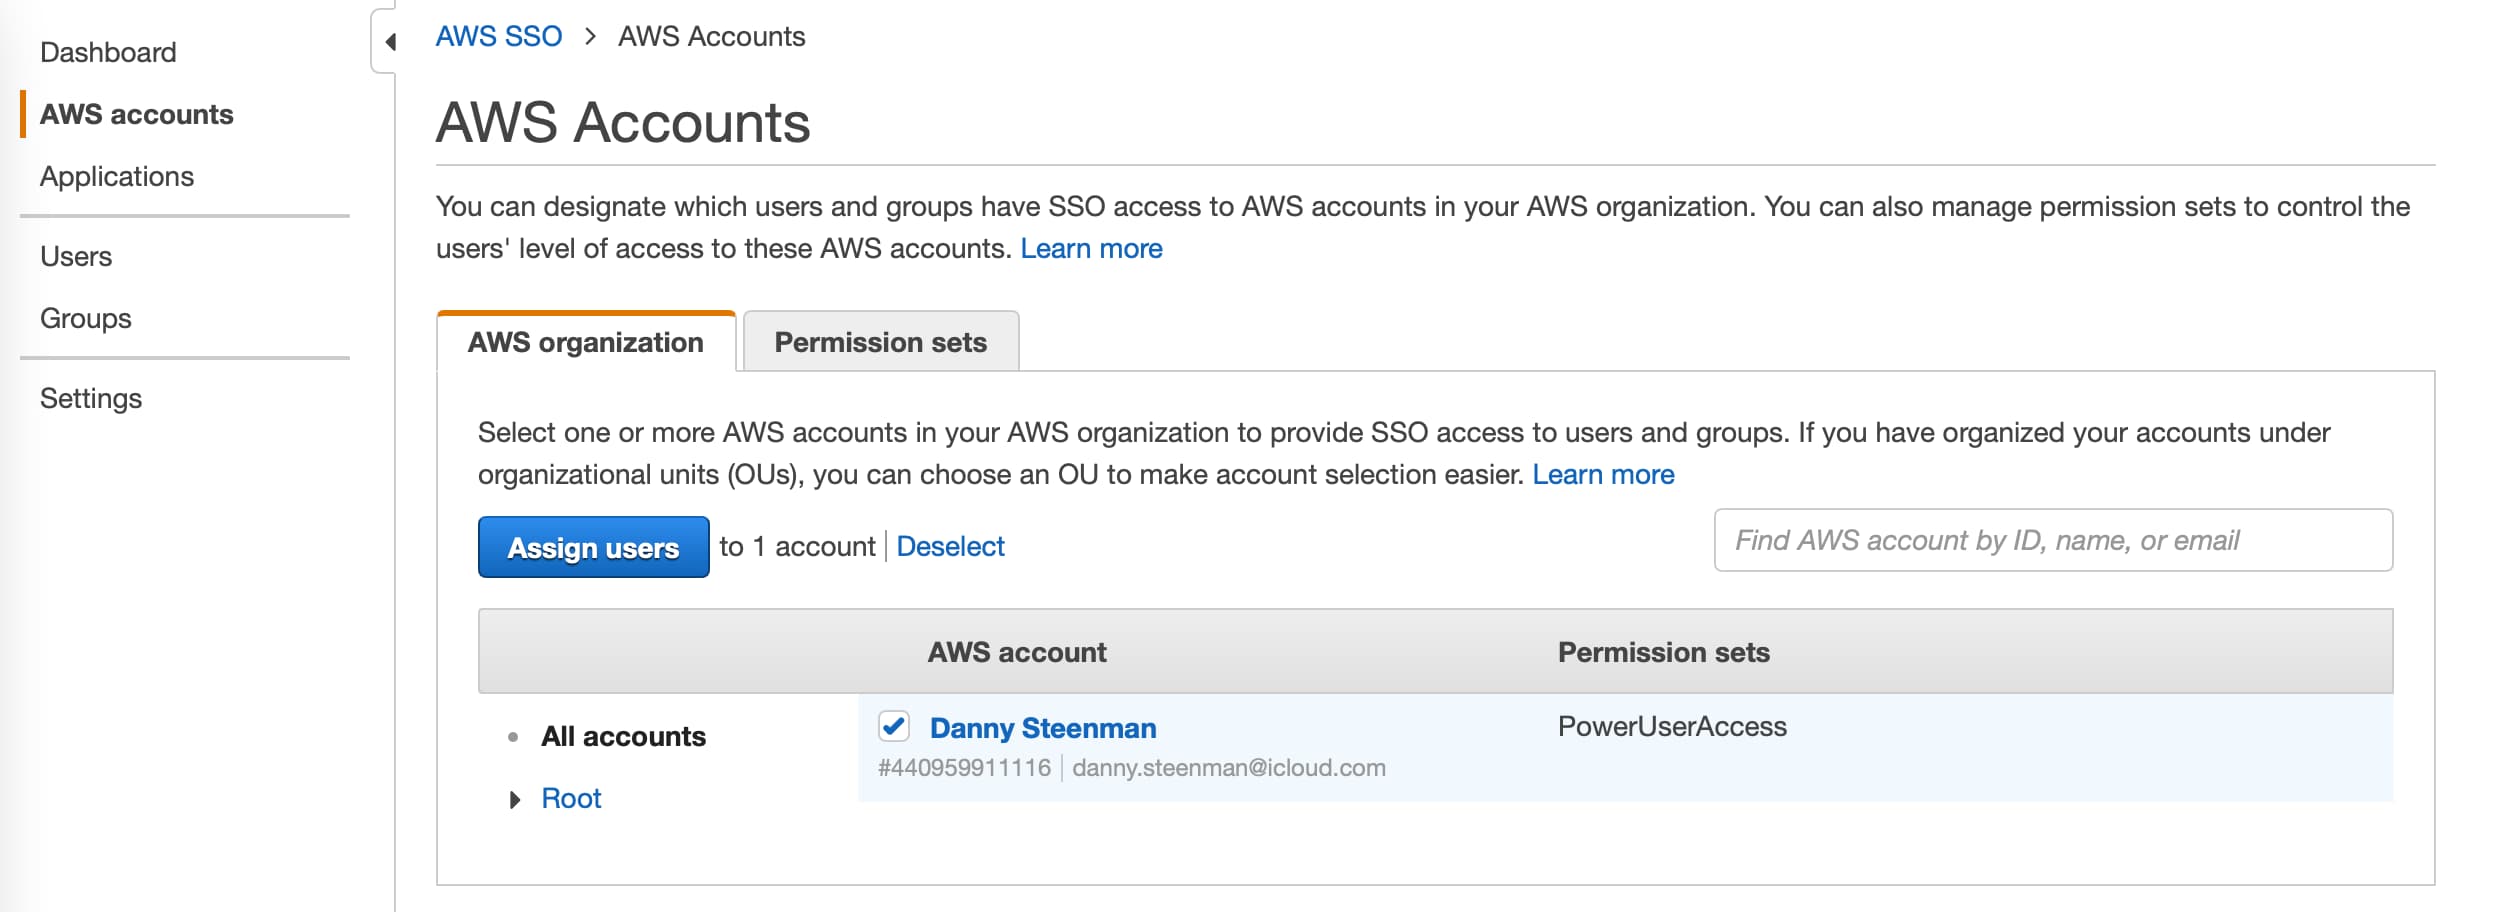 Give AWS SSO user access on your AWS account through permission sets